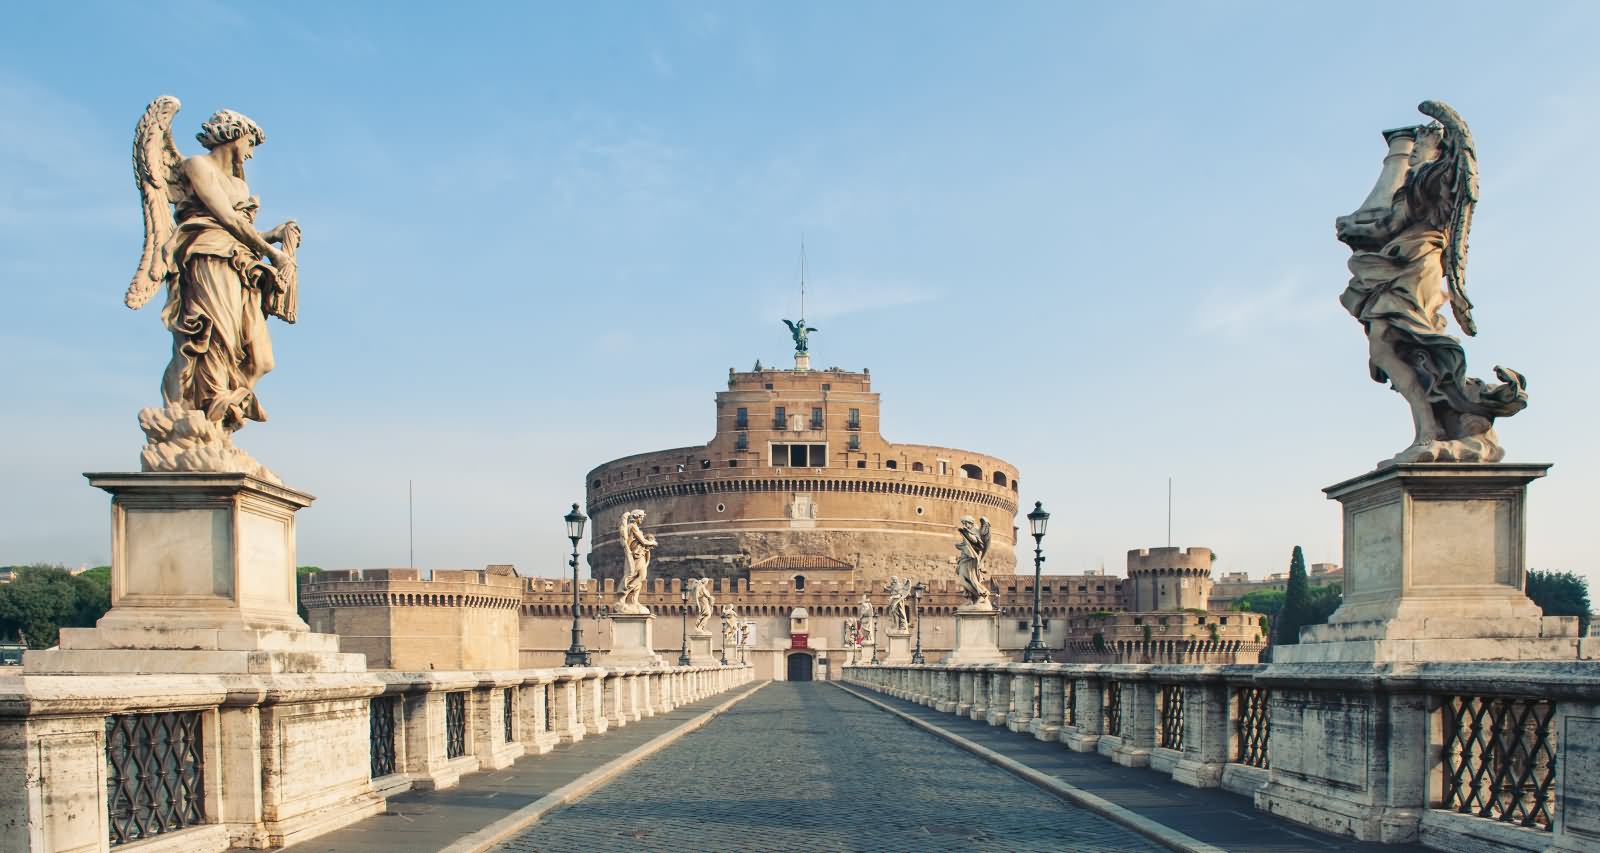 Angel Sculptures On The Way Of Castel Sant’Angelo